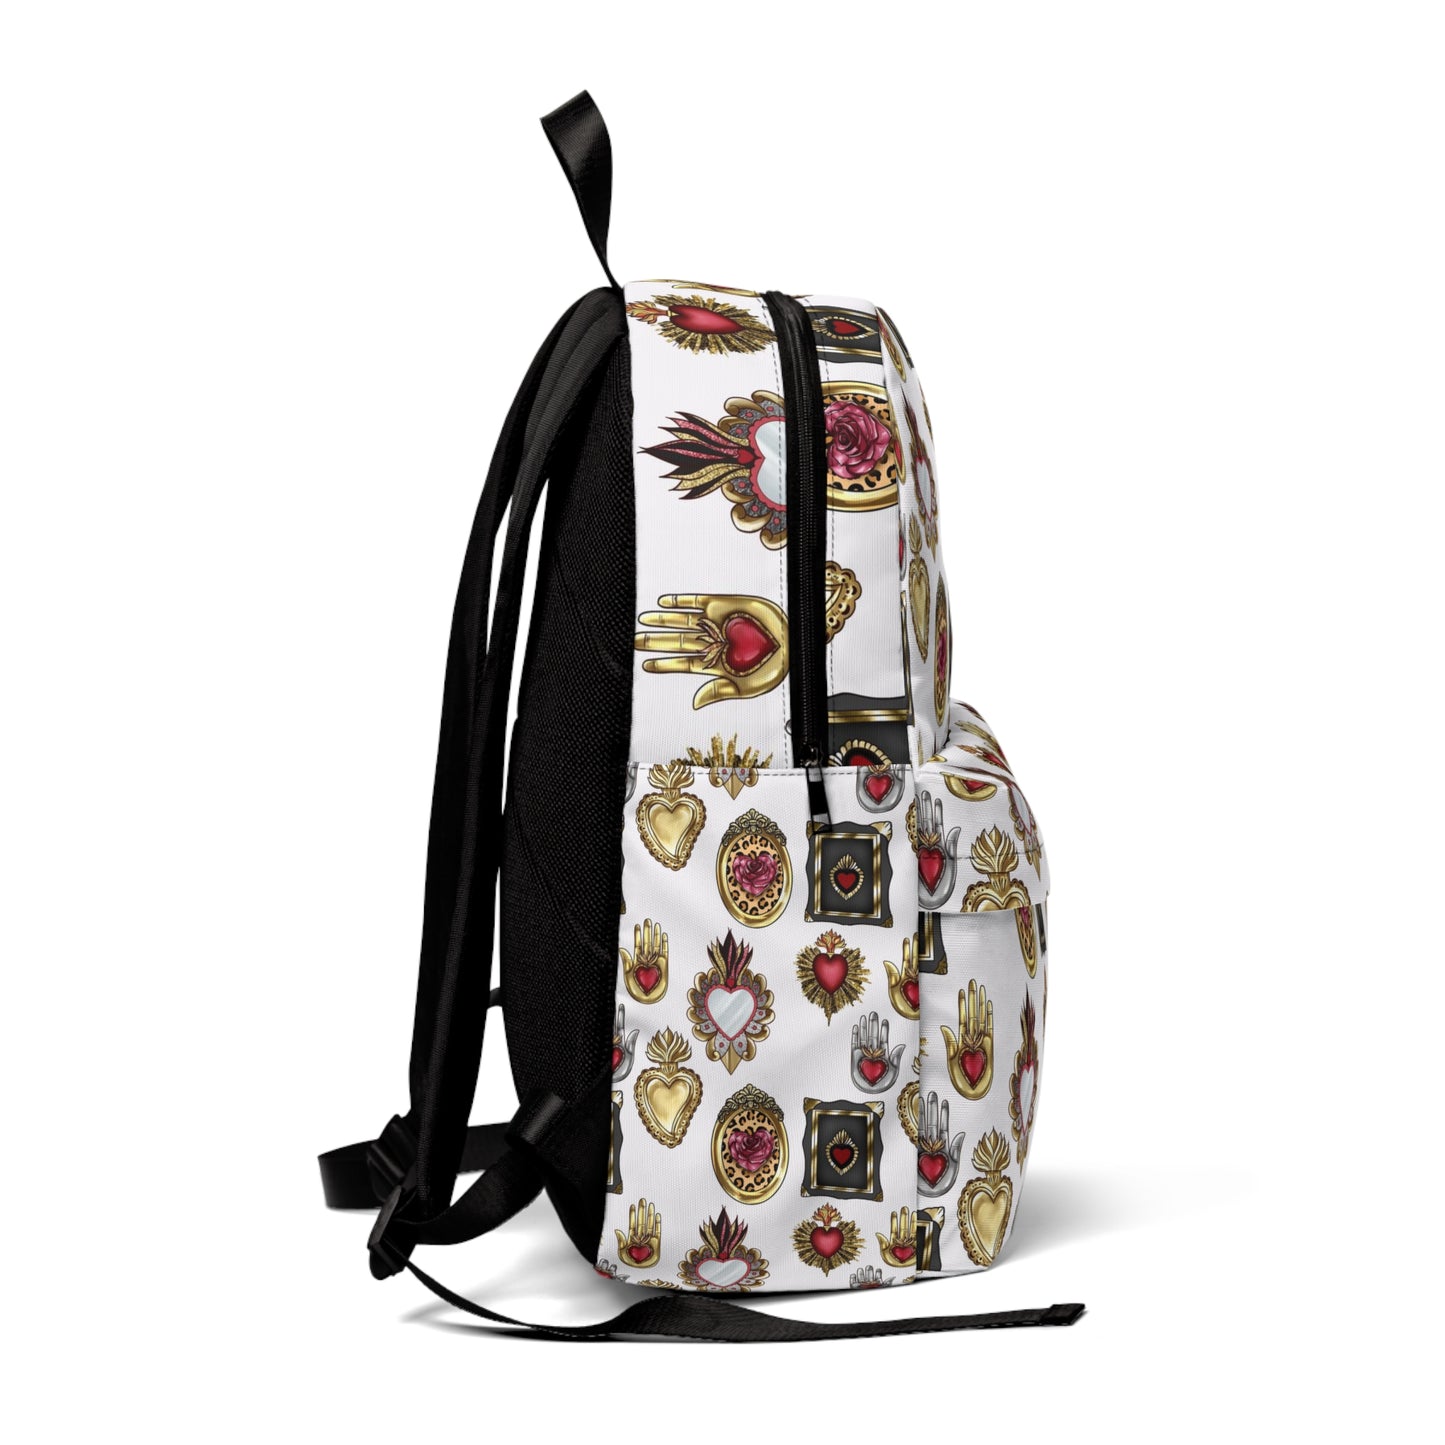 Sacred hearts Backpack for her. Back to school 2023 with this Mexican book bag. Golden, white, black and red backpack with holy hearts.